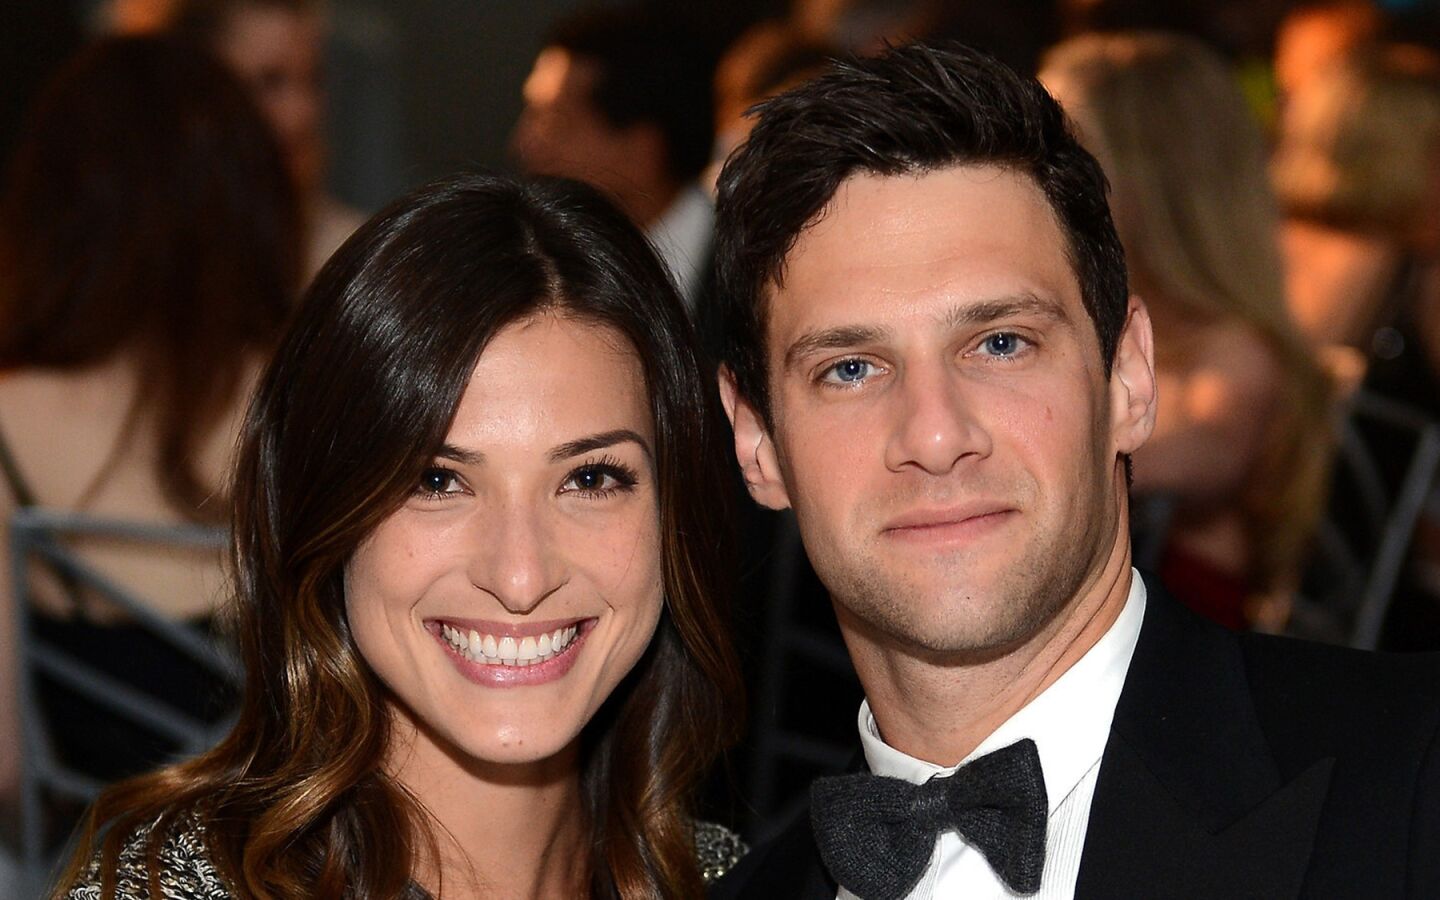 "The Hangover" star Justin Bartha wed fitness trainer Lia Smith on Jan. 4 on Oahu, Hawaii. Their intimate ceremony included fewer than two dozen guests. Among them were Oscar-winner Reese Witherspoon, her husband and Bartha's agent, Jim Toth, "The Social Network's" Jesse Eisenberg and Bartha's "Hangover" costar Ken Jeong.